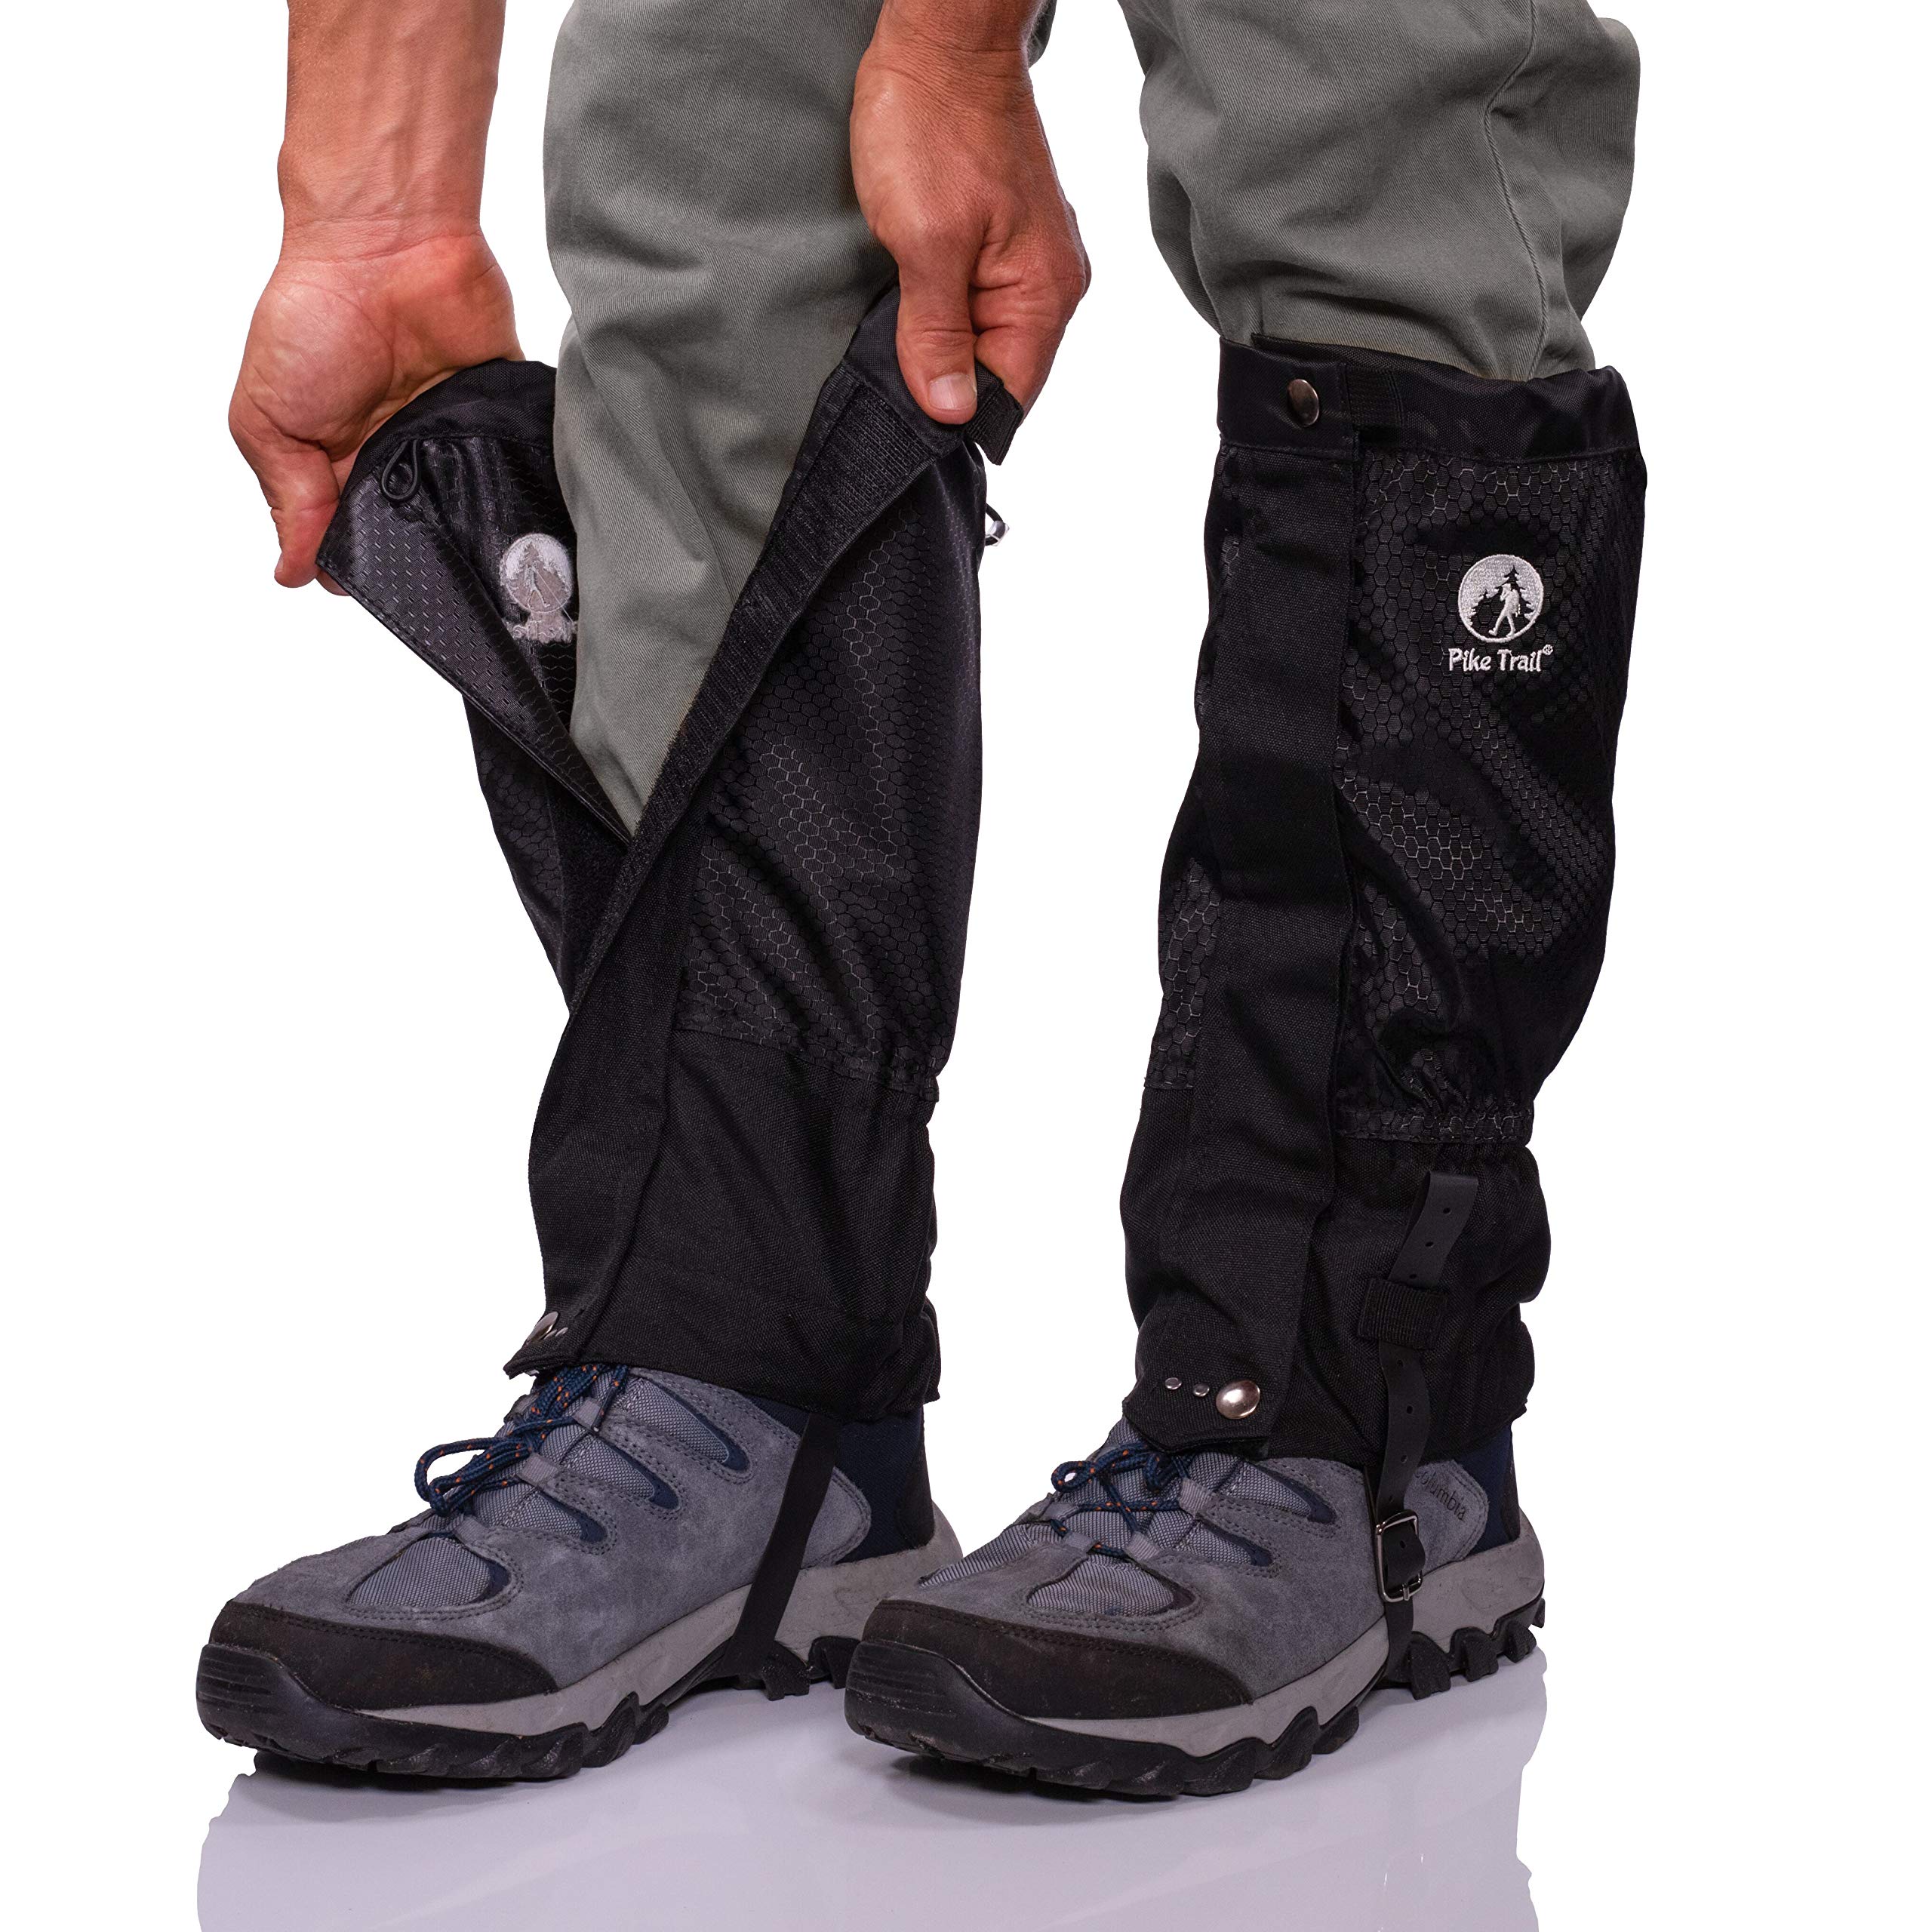 Pike Trail Leg Gaiters Waterproof and Adjustable Snow Boot Gaiters for  Hiking, Walking, Hunting, Mountain Climbing